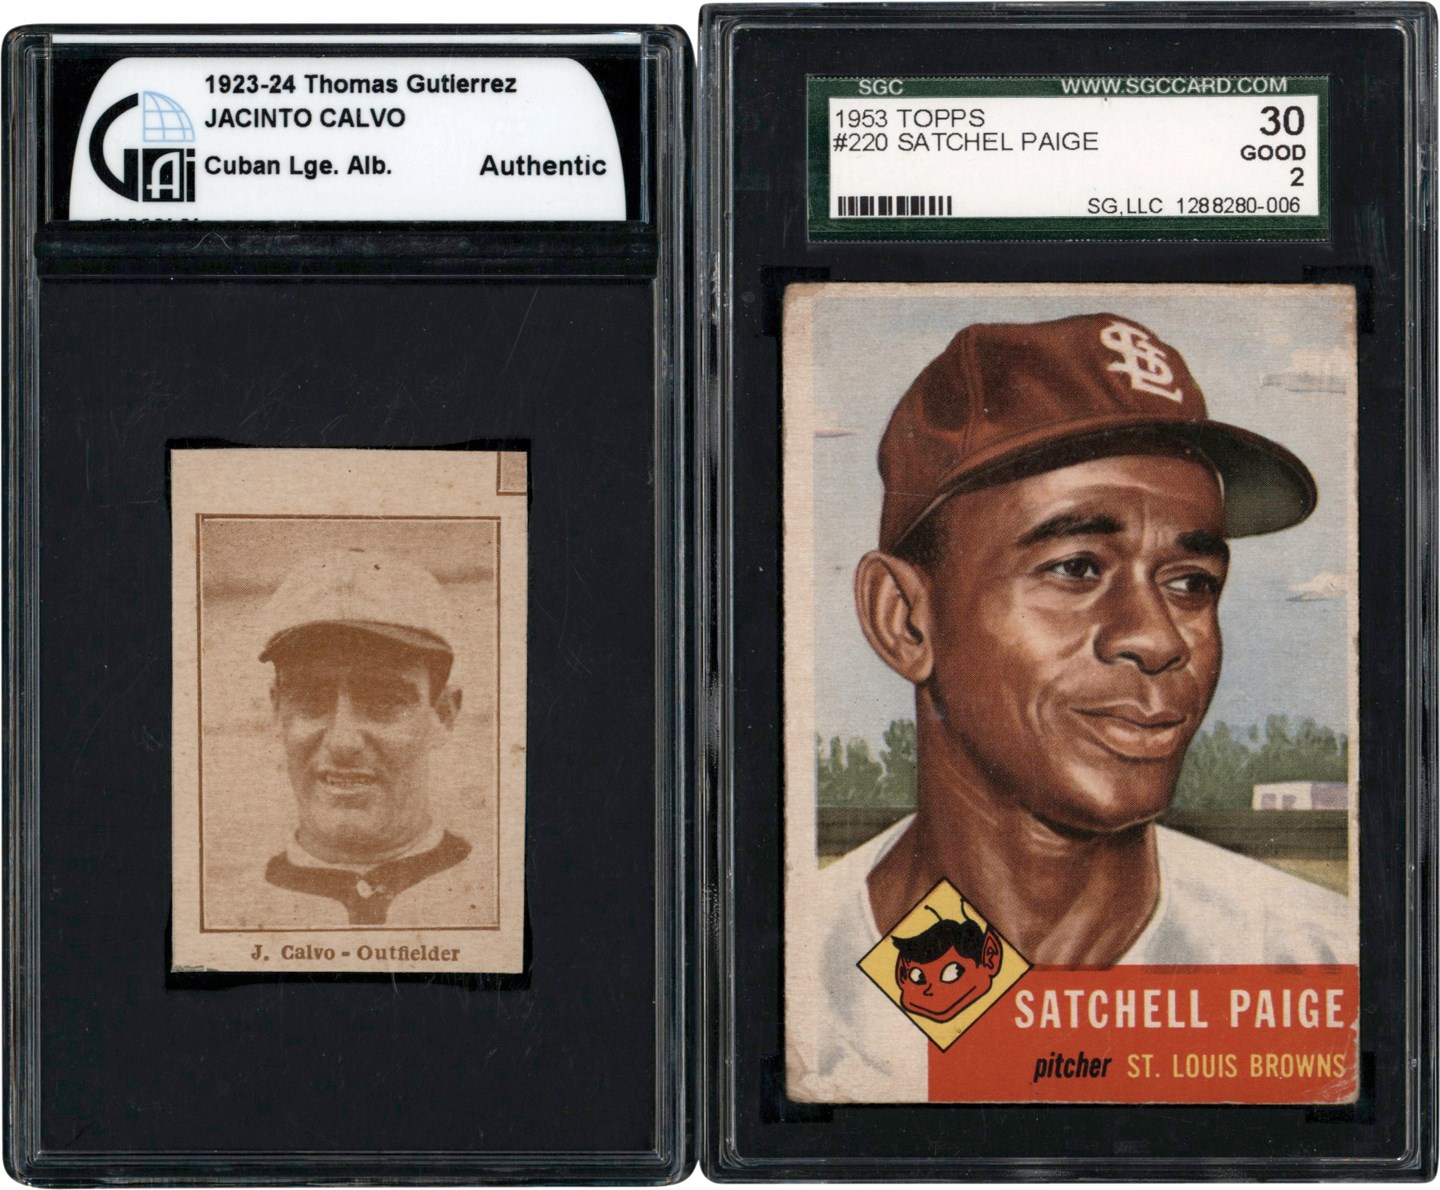 912-1968 Vintage Baseball Collection w/1953 Topps Satchell Paige (12)